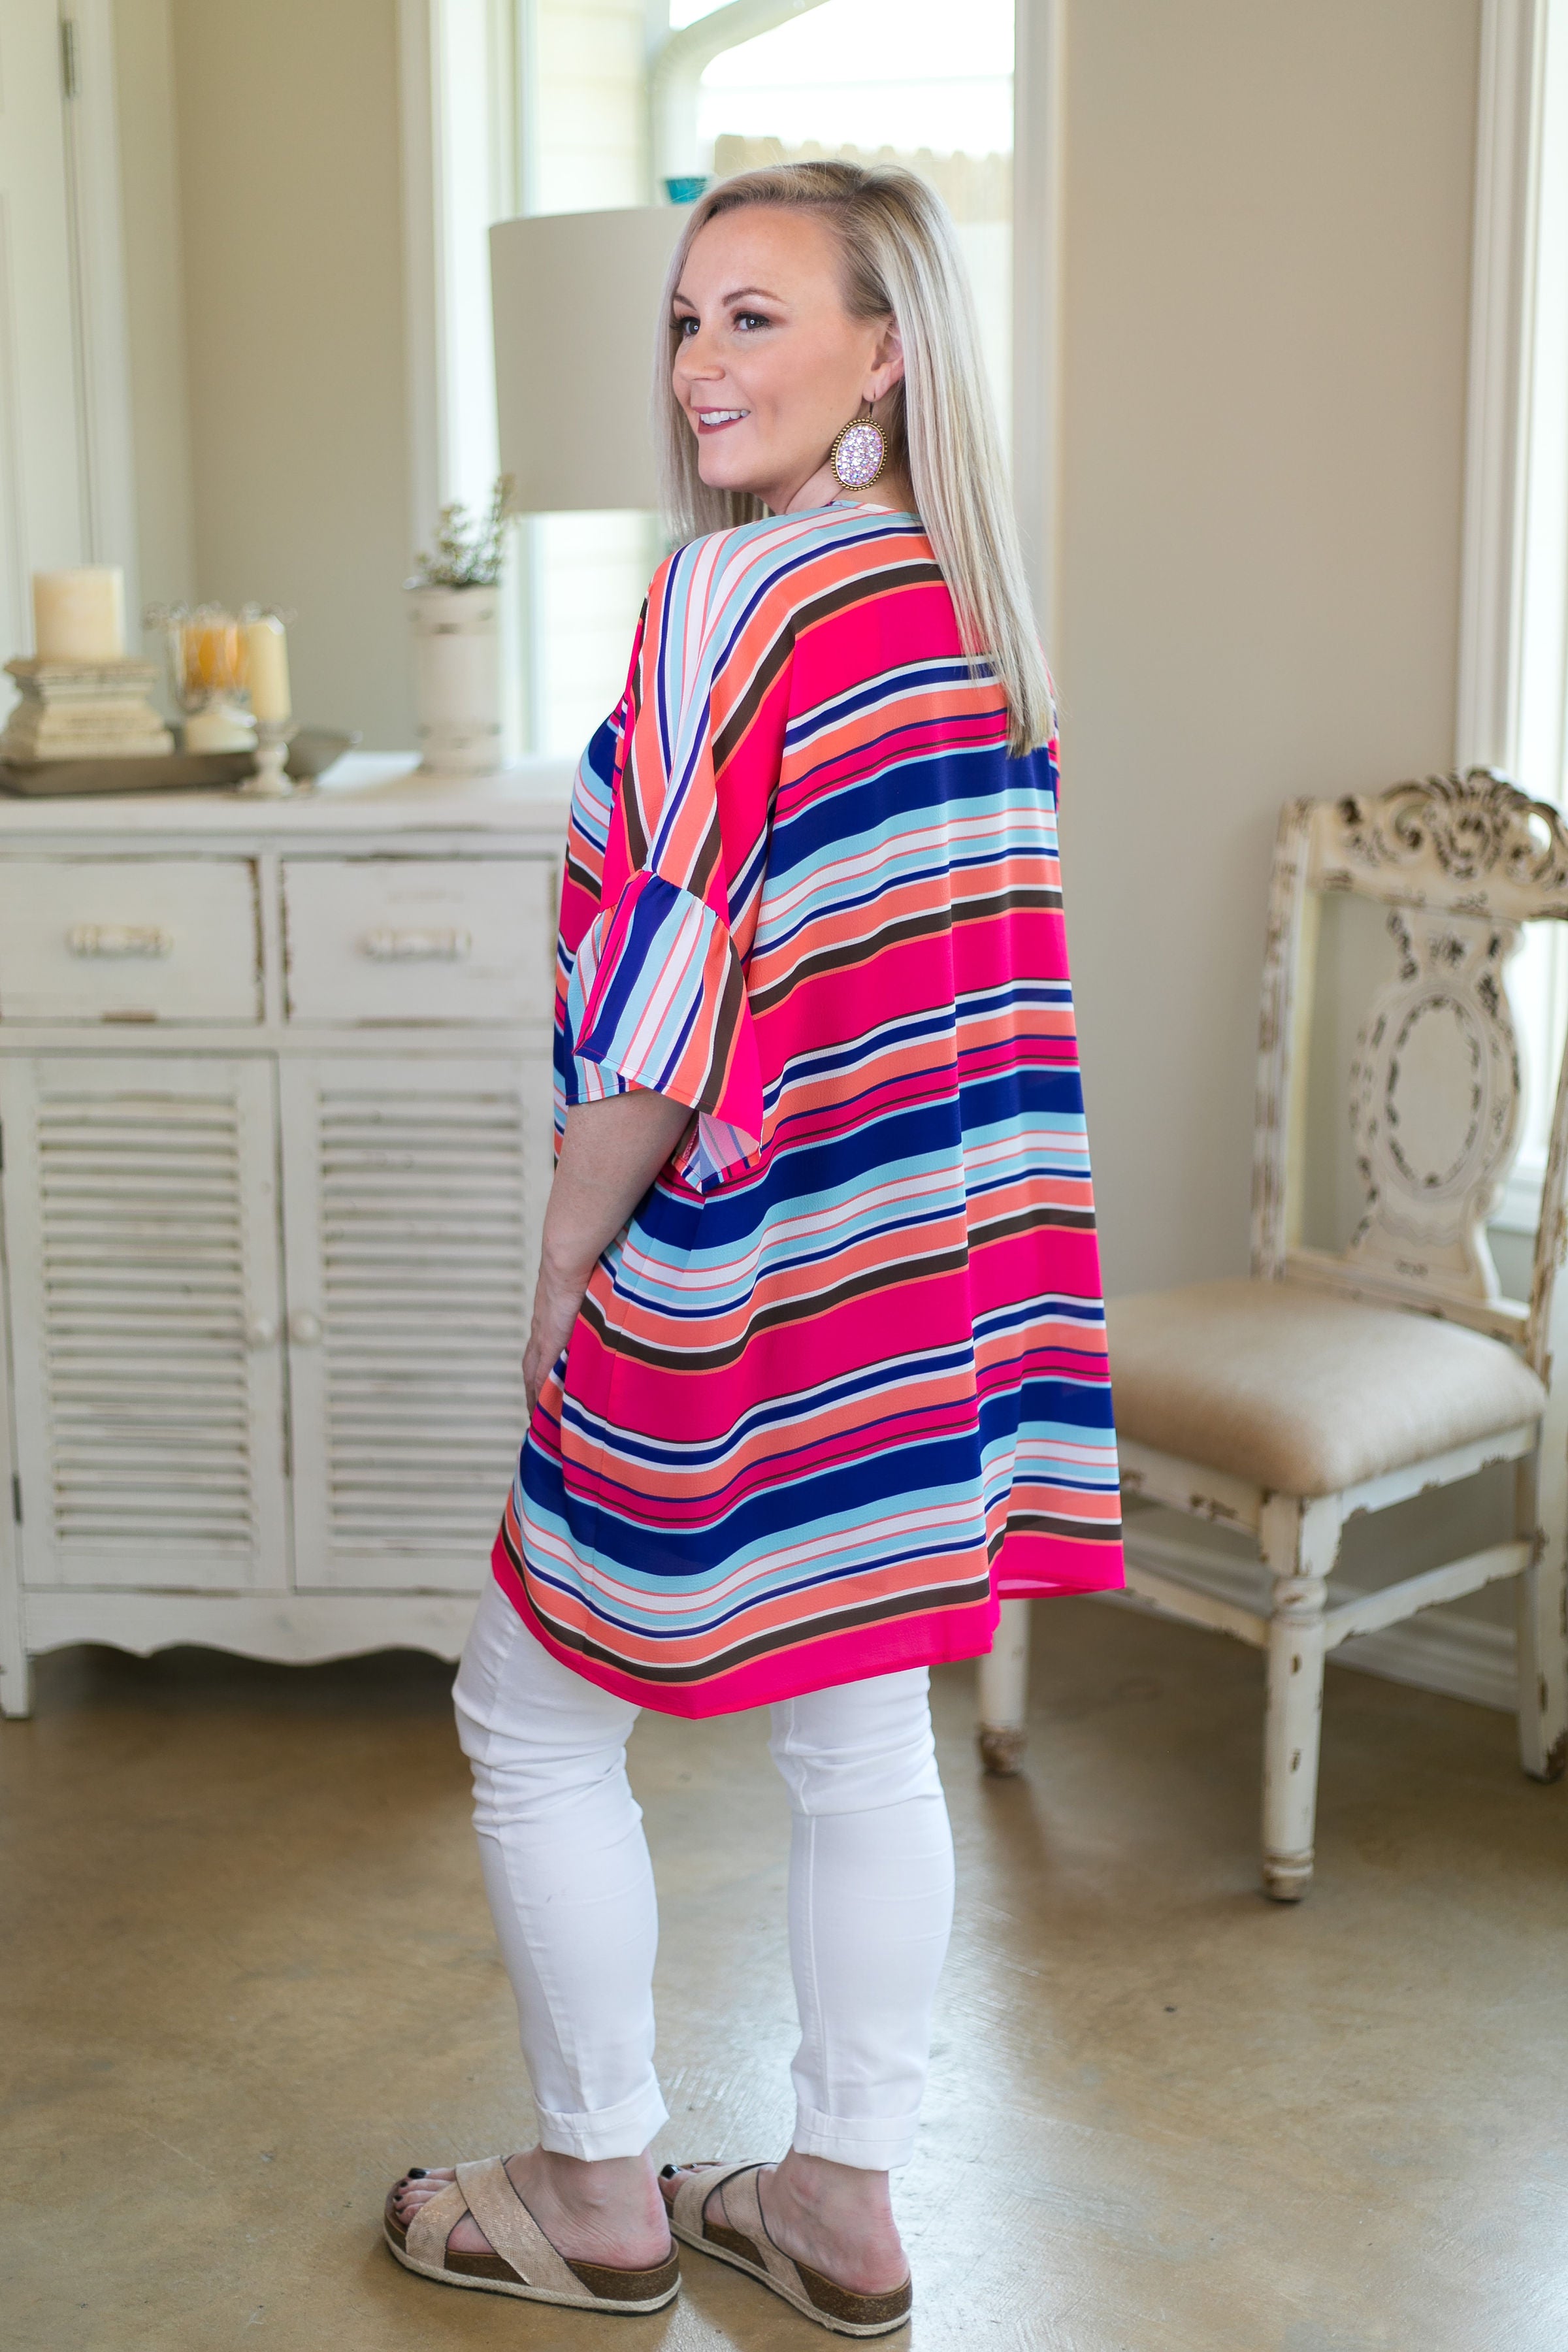 Over the line Women's trendy plus size boutique clothing affordable stripe striped print kimono duster sheer cover up with ruffle sleeves navy blue pink coral rainbow multi color umgee